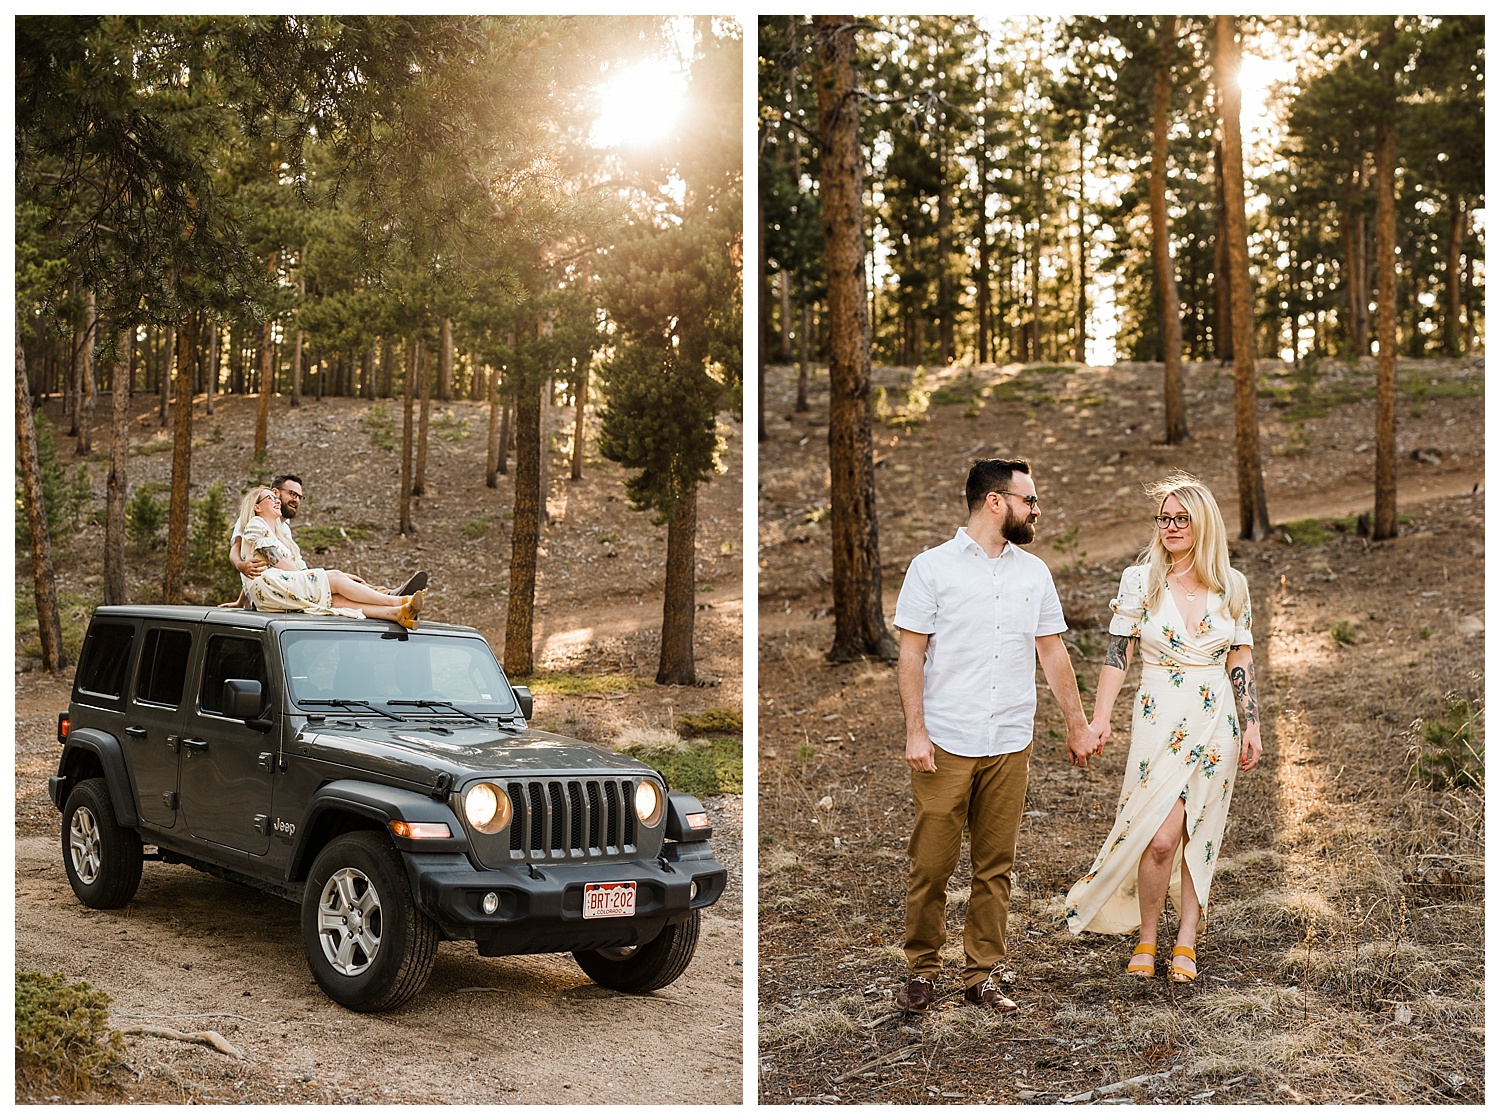 Golden_Gate_Canyon_State_Park_Engagement_Apollo_Fields_11.jpg